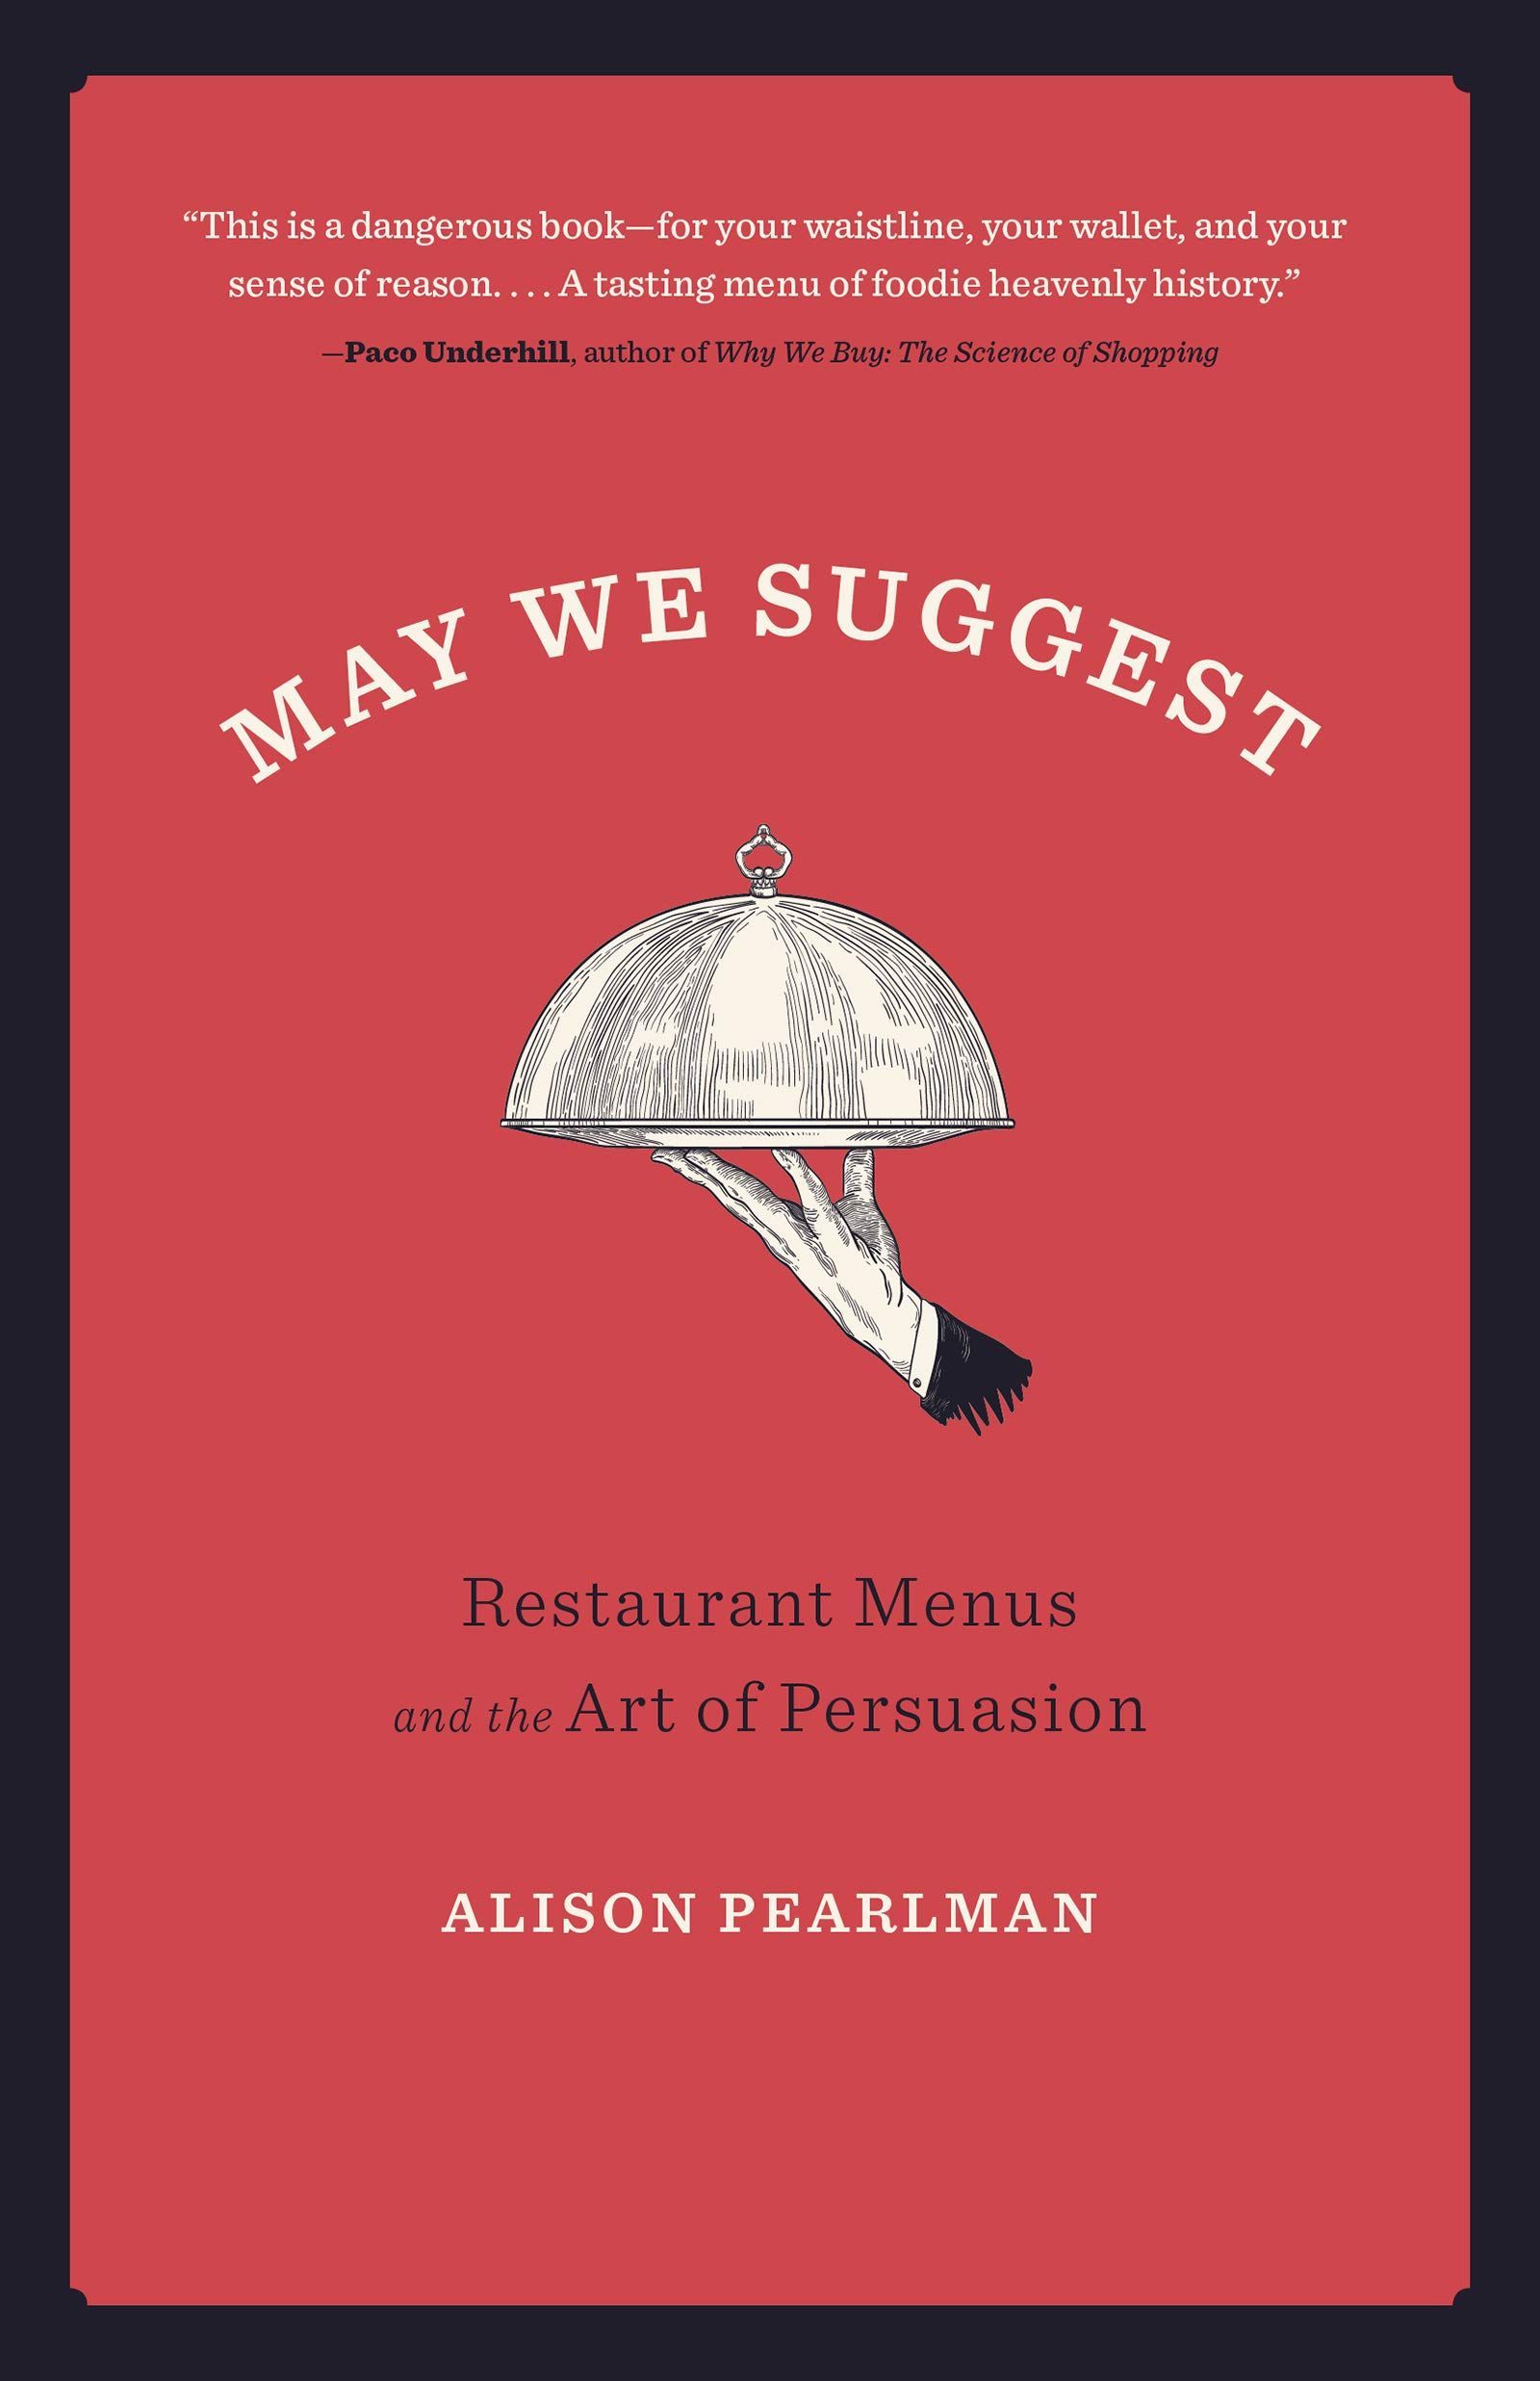 Menu Matters: On Alison Pearlman’s “May We Suggest”